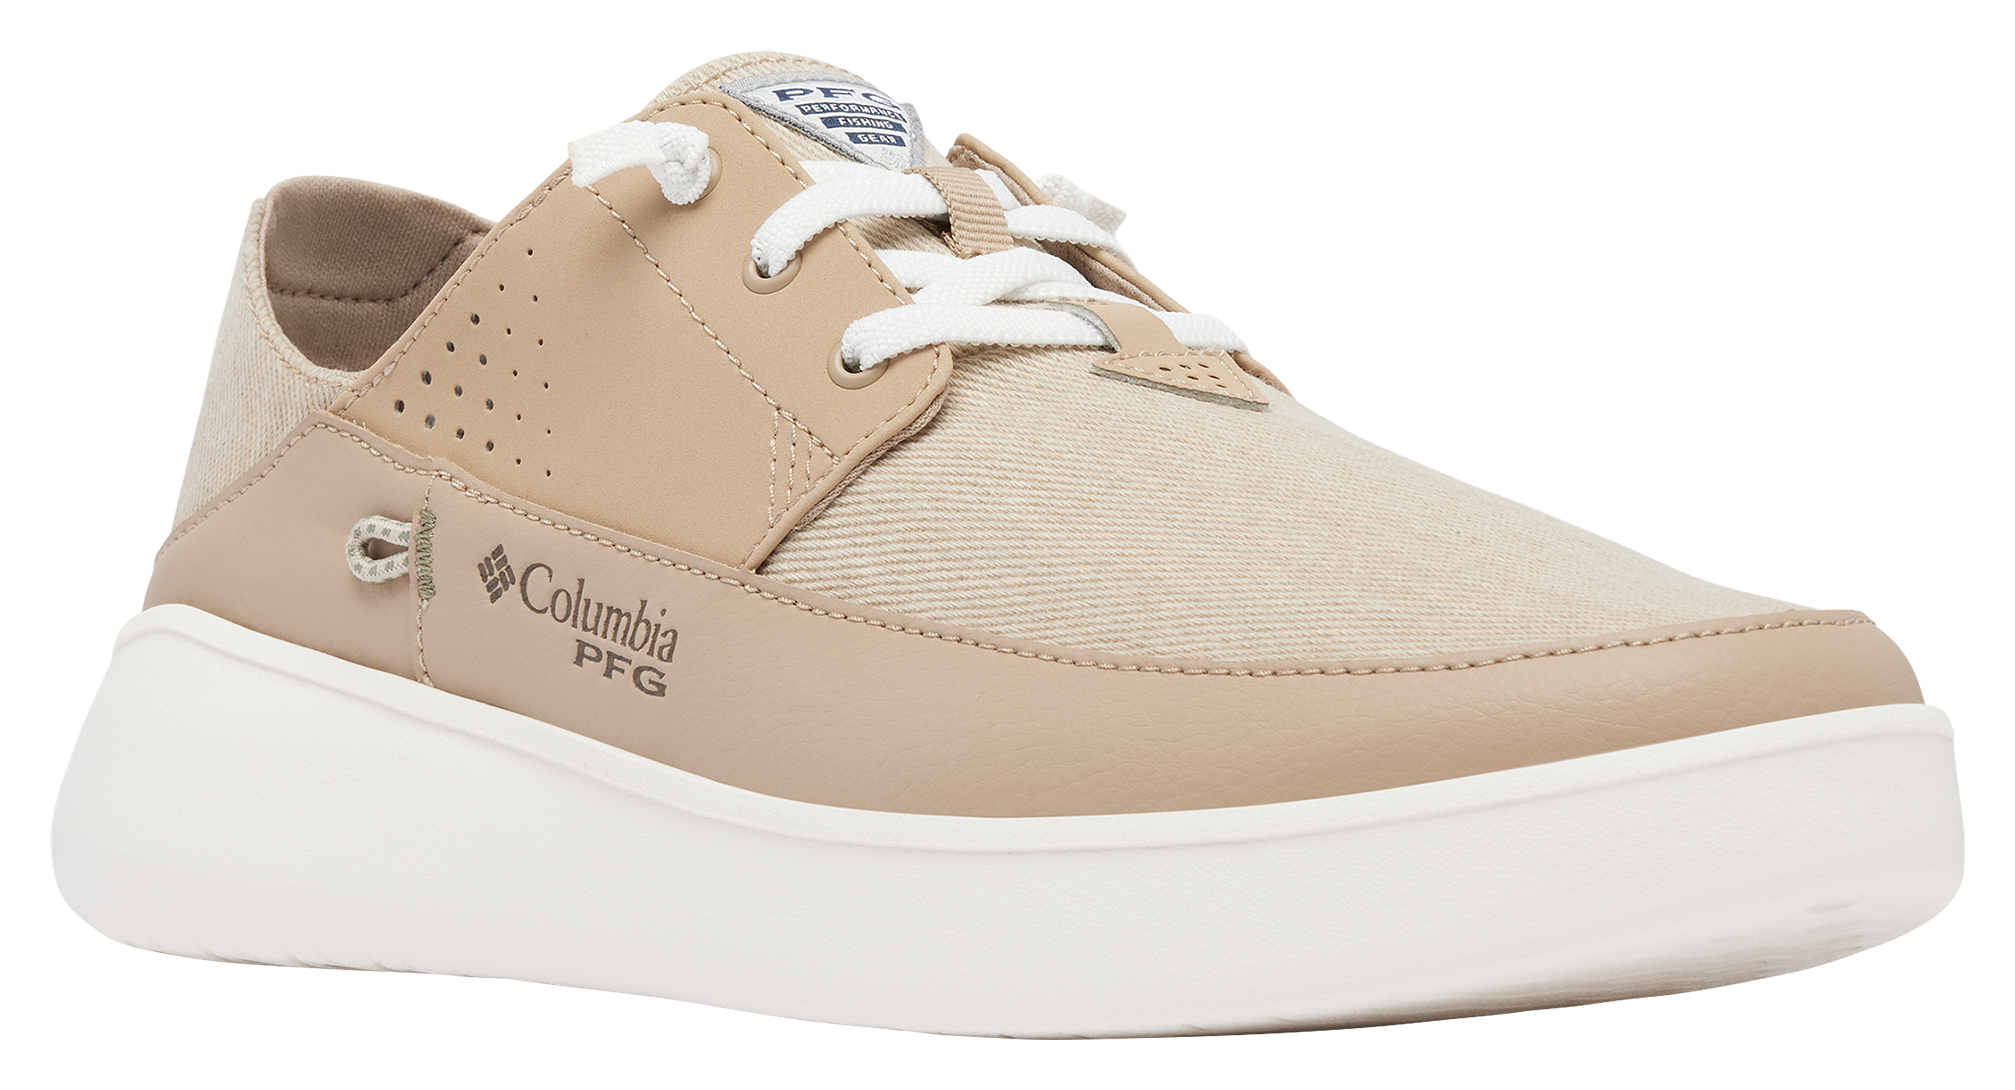 Columbia Boatside Relaxed PFG Shoes for Men